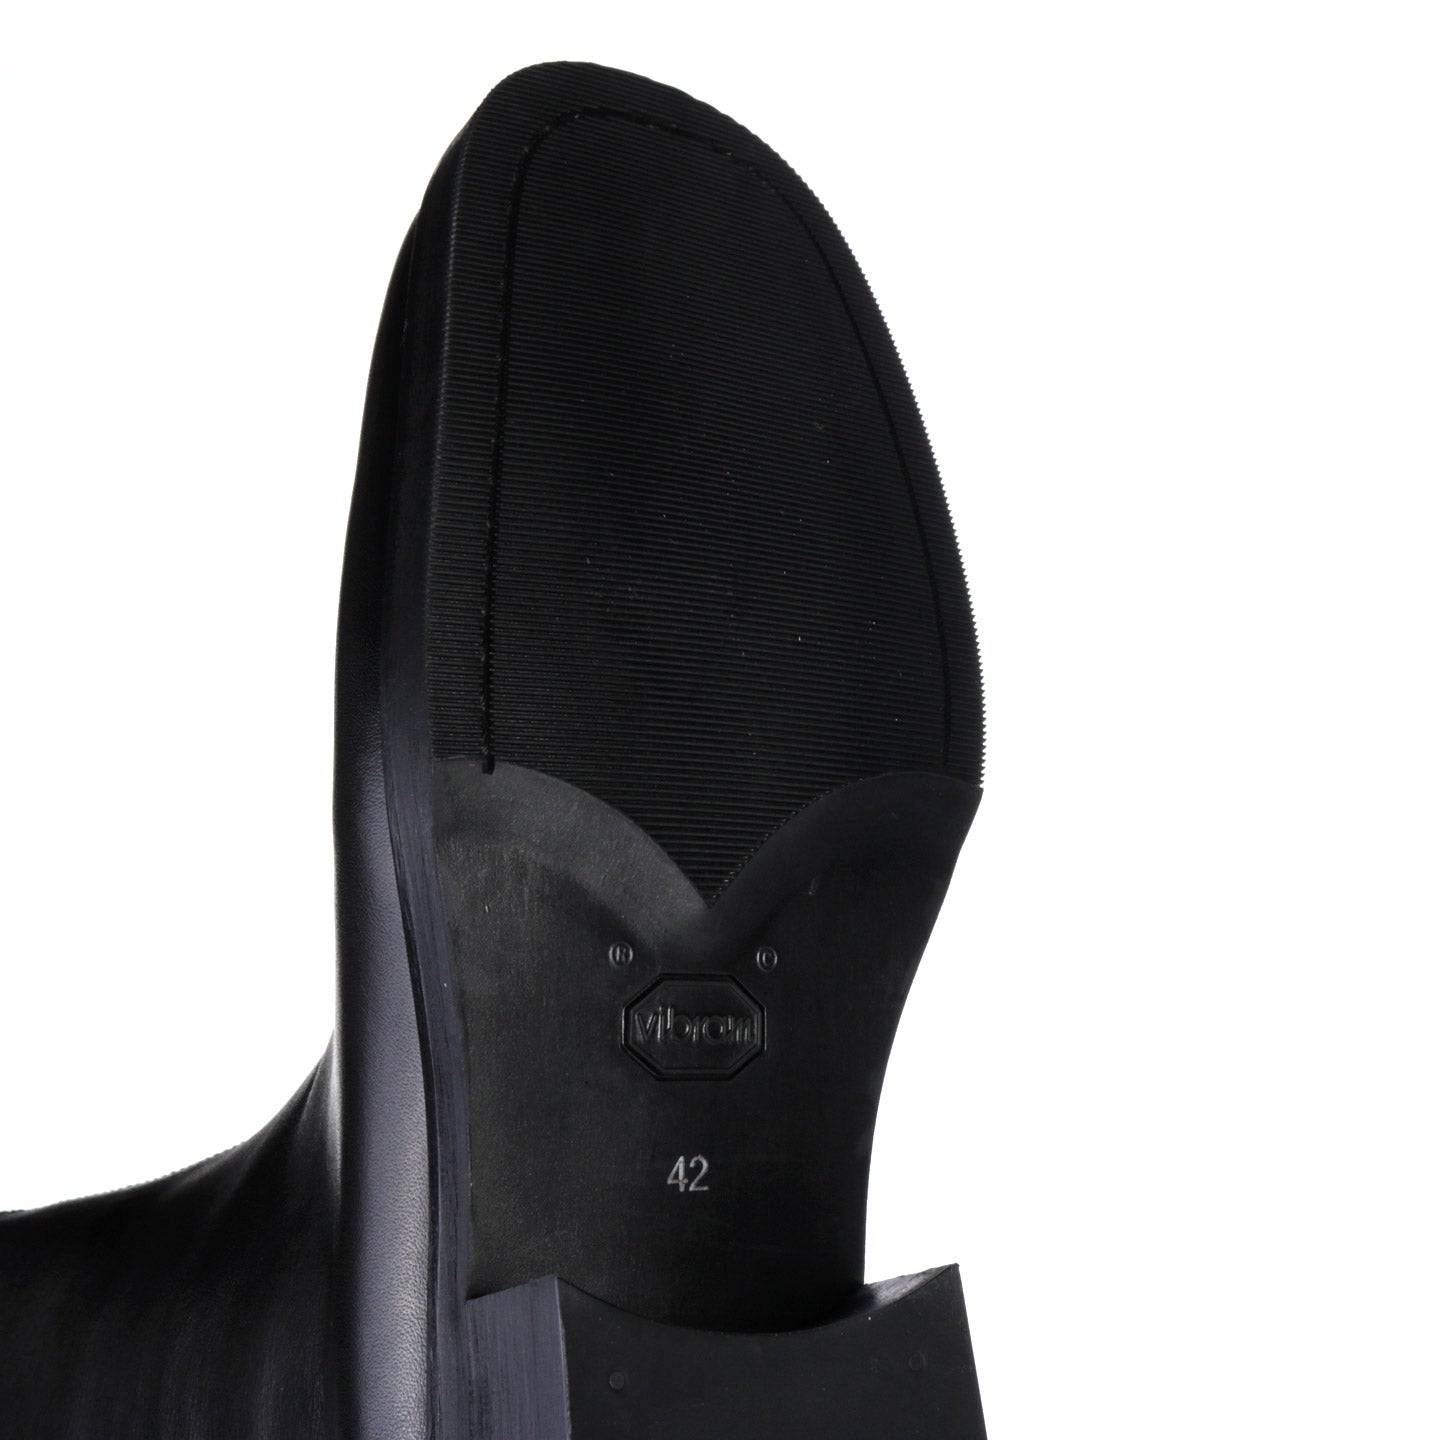 OUR LEGACY CAMION BOOT BLACK